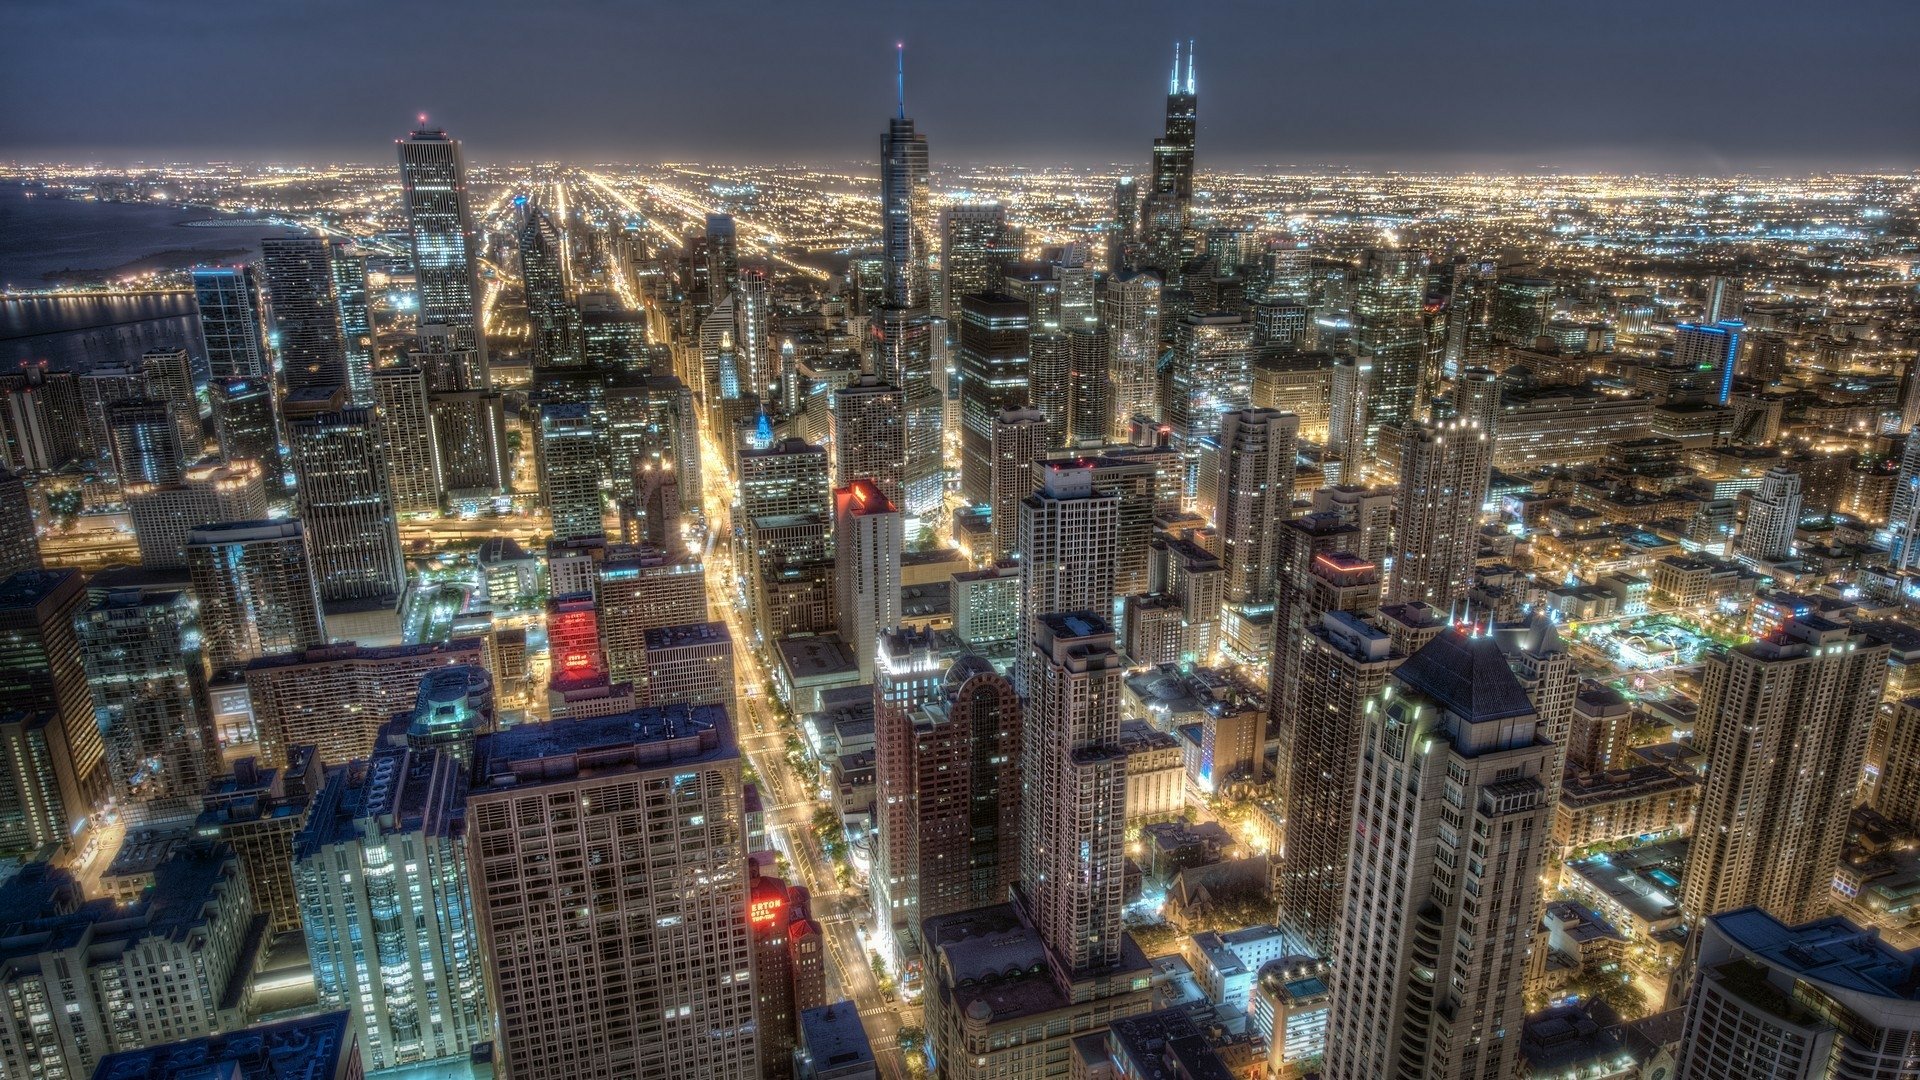 Download Light HDR Building City Cityscape Man Made Chicago  HD Wallpaper